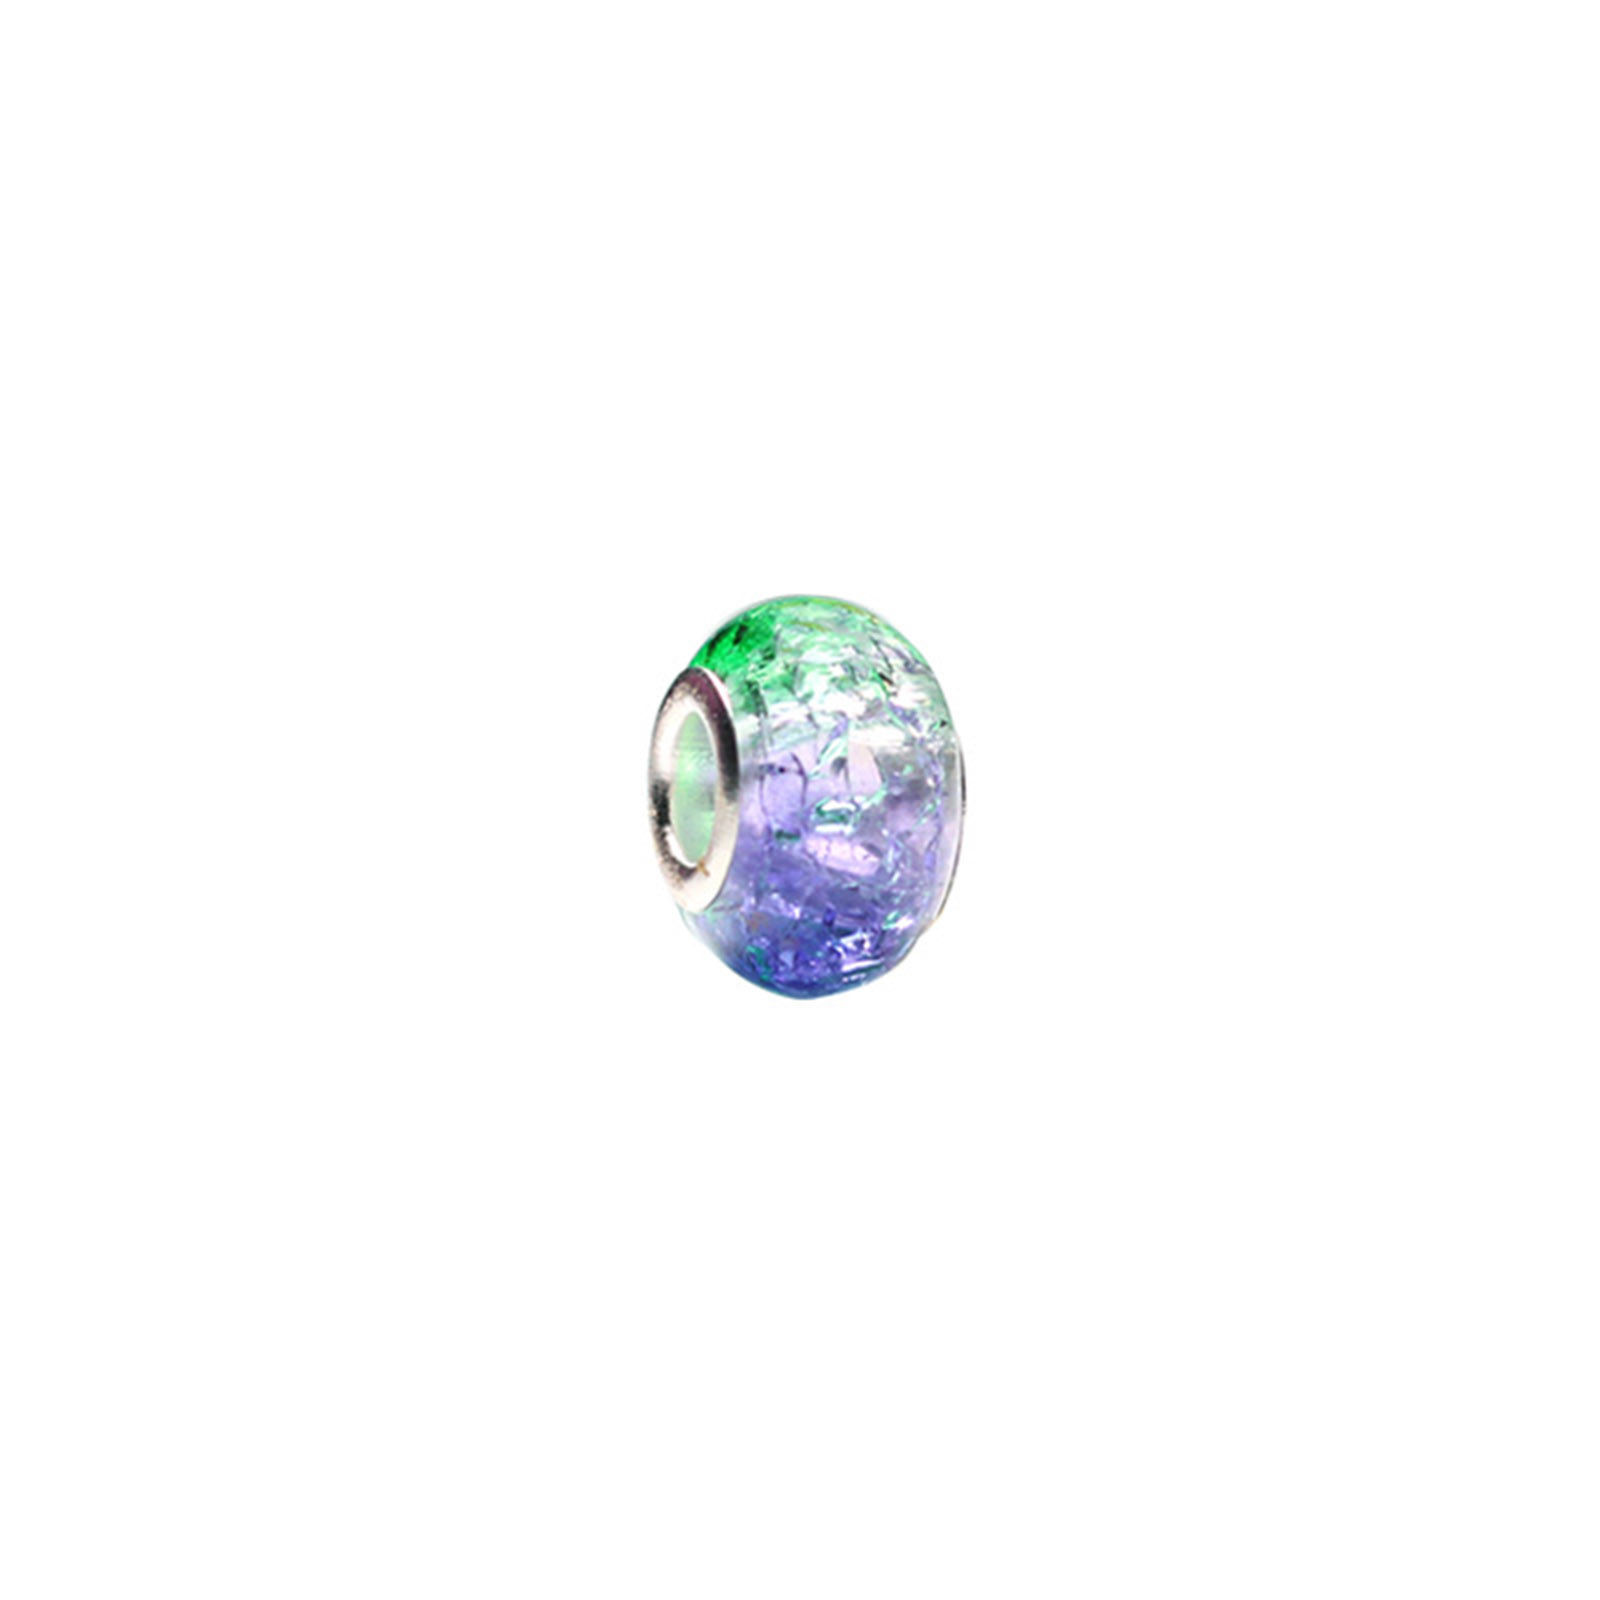 Picture of Resin European Style Large Hole Charm Beads Purple & Green Round Crack Gradient Color 14mm Dia., Hole: Approx 5mm, 20 PCs